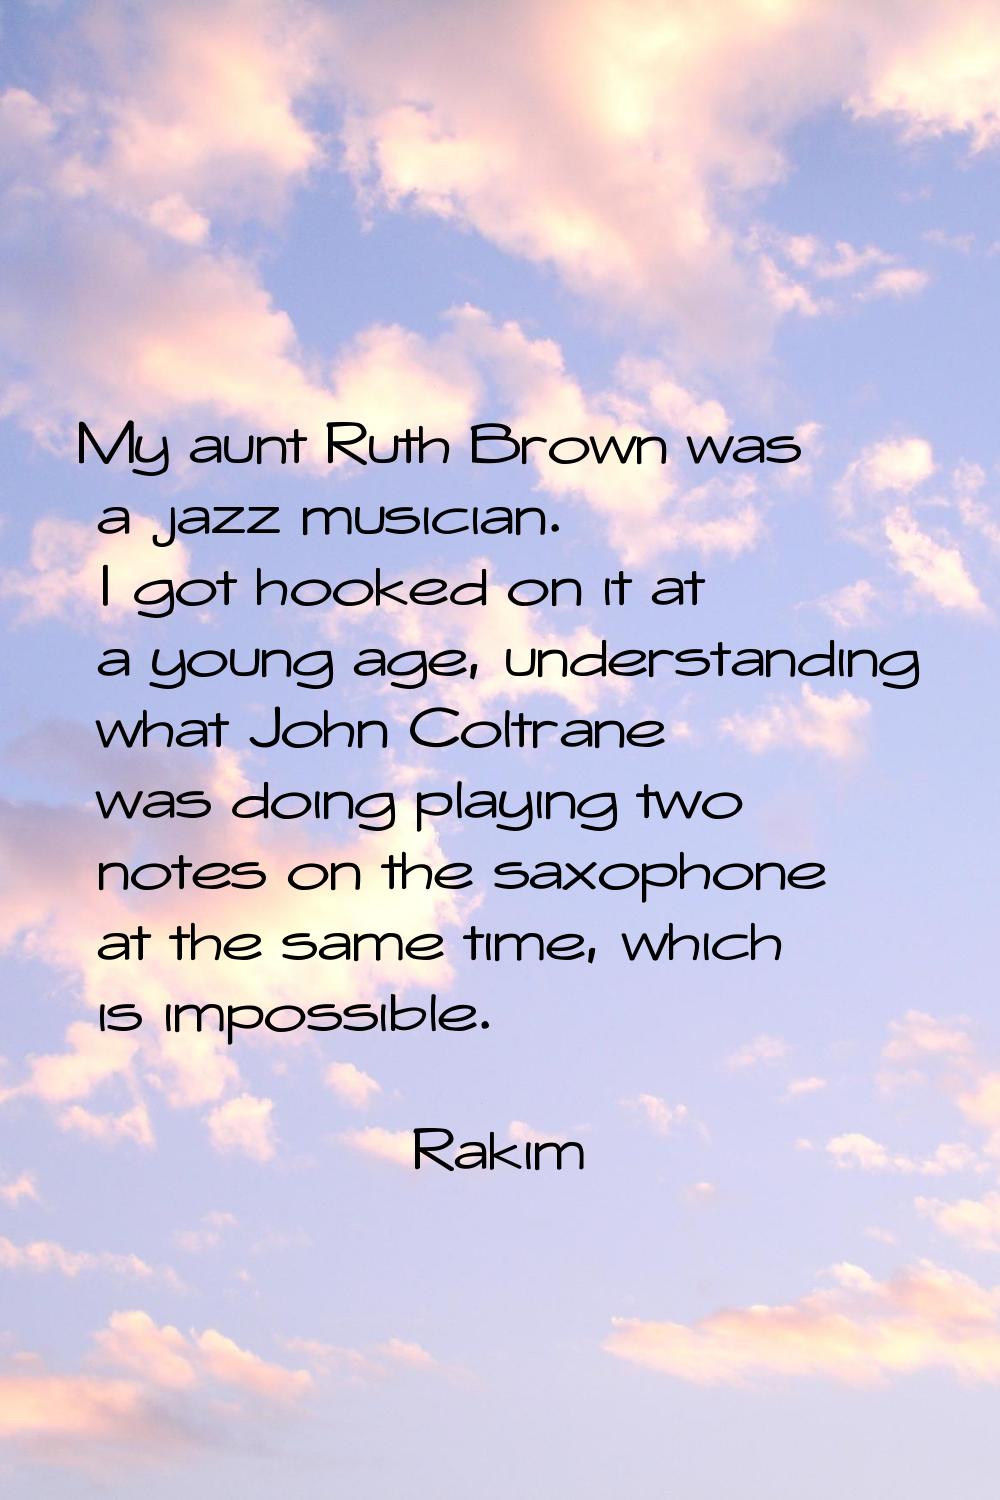 My aunt Ruth Brown was a jazz musician. I got hooked on it at a young age, understanding what John 